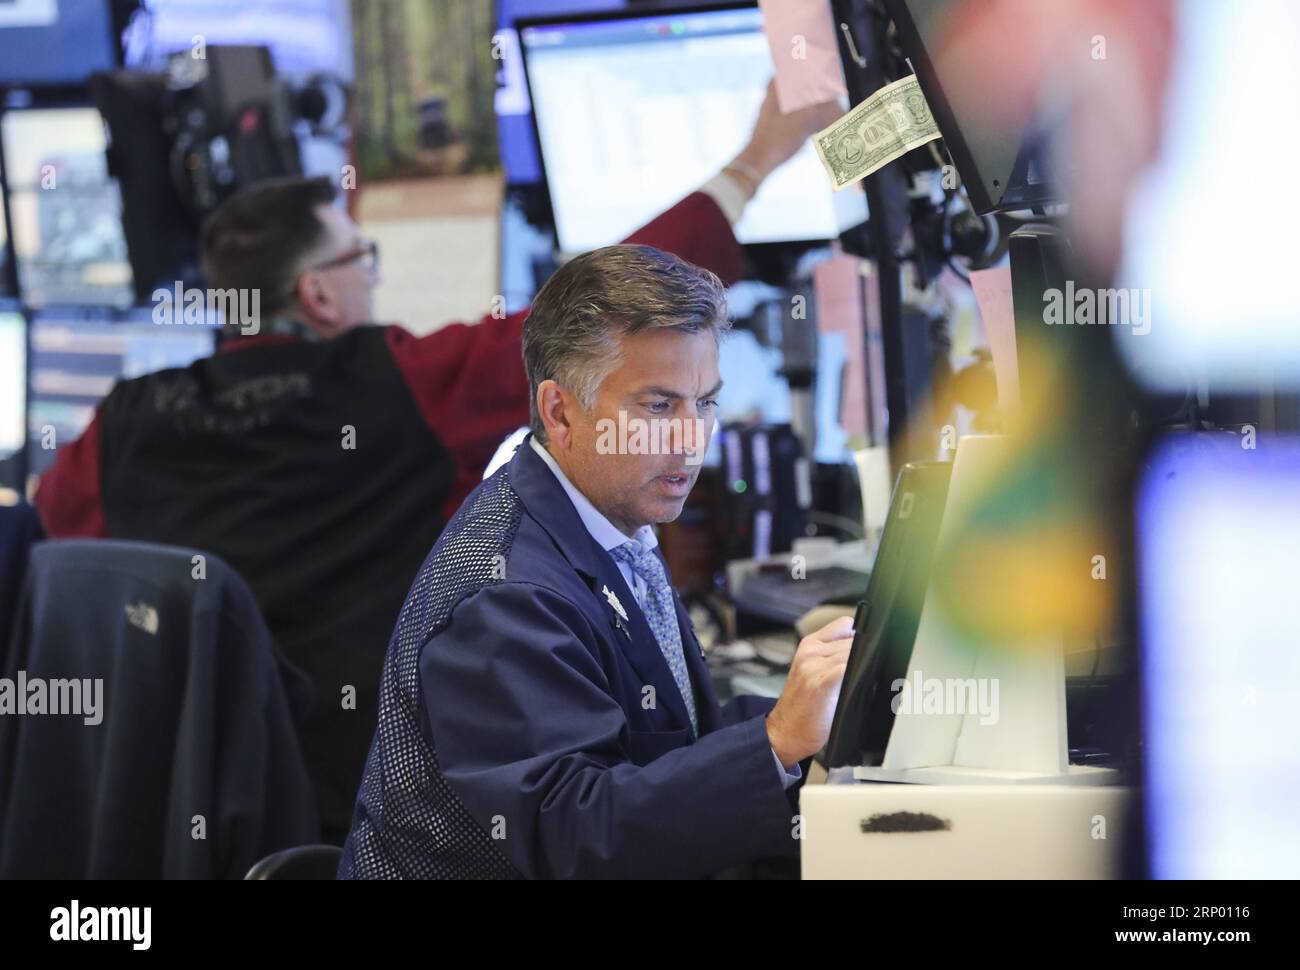 (180411) -- NEW YORK, April 11, 2018 -- Traders work at the New York Stock Exchange in New York, the United States, April 11, 2018. U.S. stocks closed lower on Wednesday. The Dow decreased 0.90 percent to 24,189.45, and the S&P 500 erased 0.55 percent to 2,642.19, while the Nasdaq lost 0.36 percent to 7,069.03. ) U.S.-NEW YORK-STOCKS WangxYing PUBLICATIONxNOTxINxCHN Stock Photo